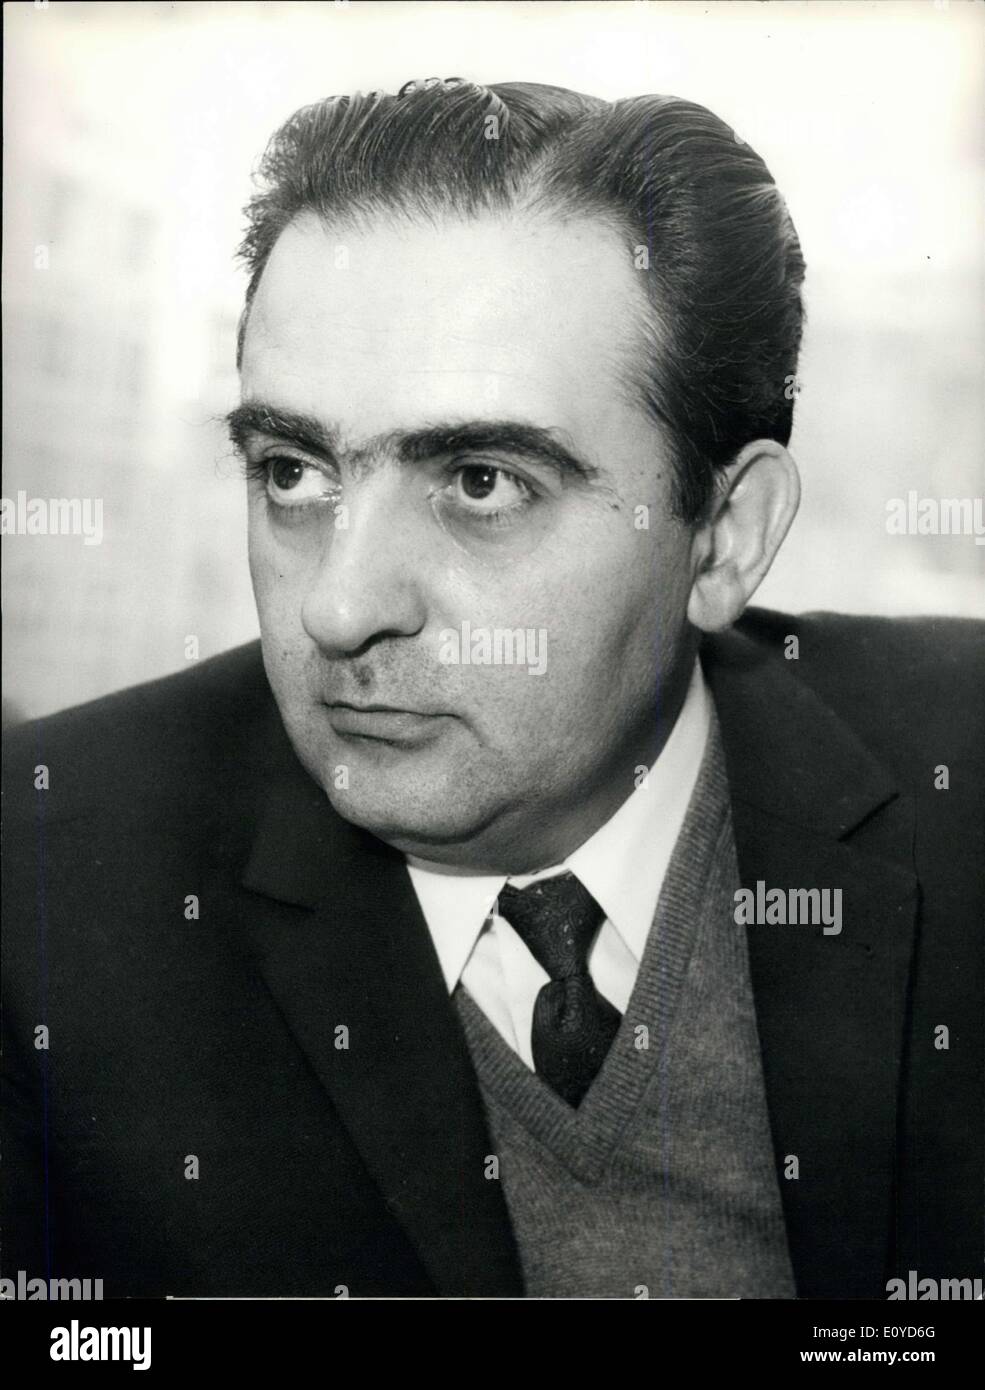 Dec. 08, 1969 - The Greek Center Union Party Abroad Meets in Zurich. OPS: The general secretary of the Greek Center Union Party Stock Photo